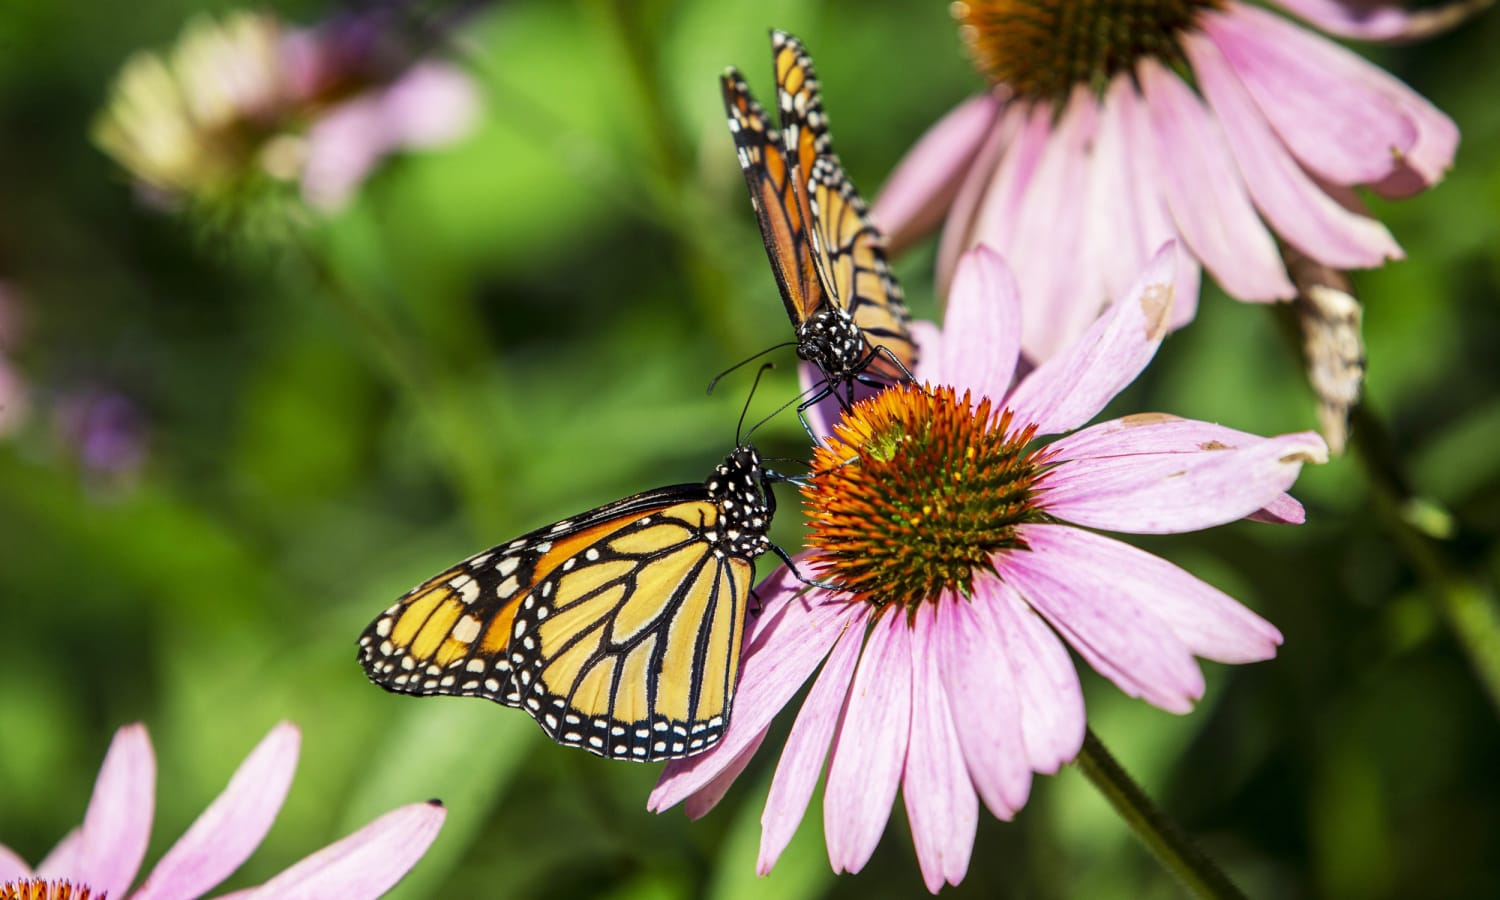 Lee Verstrooien Martelaar Monarch butterfly populations may be more stable than previously thought